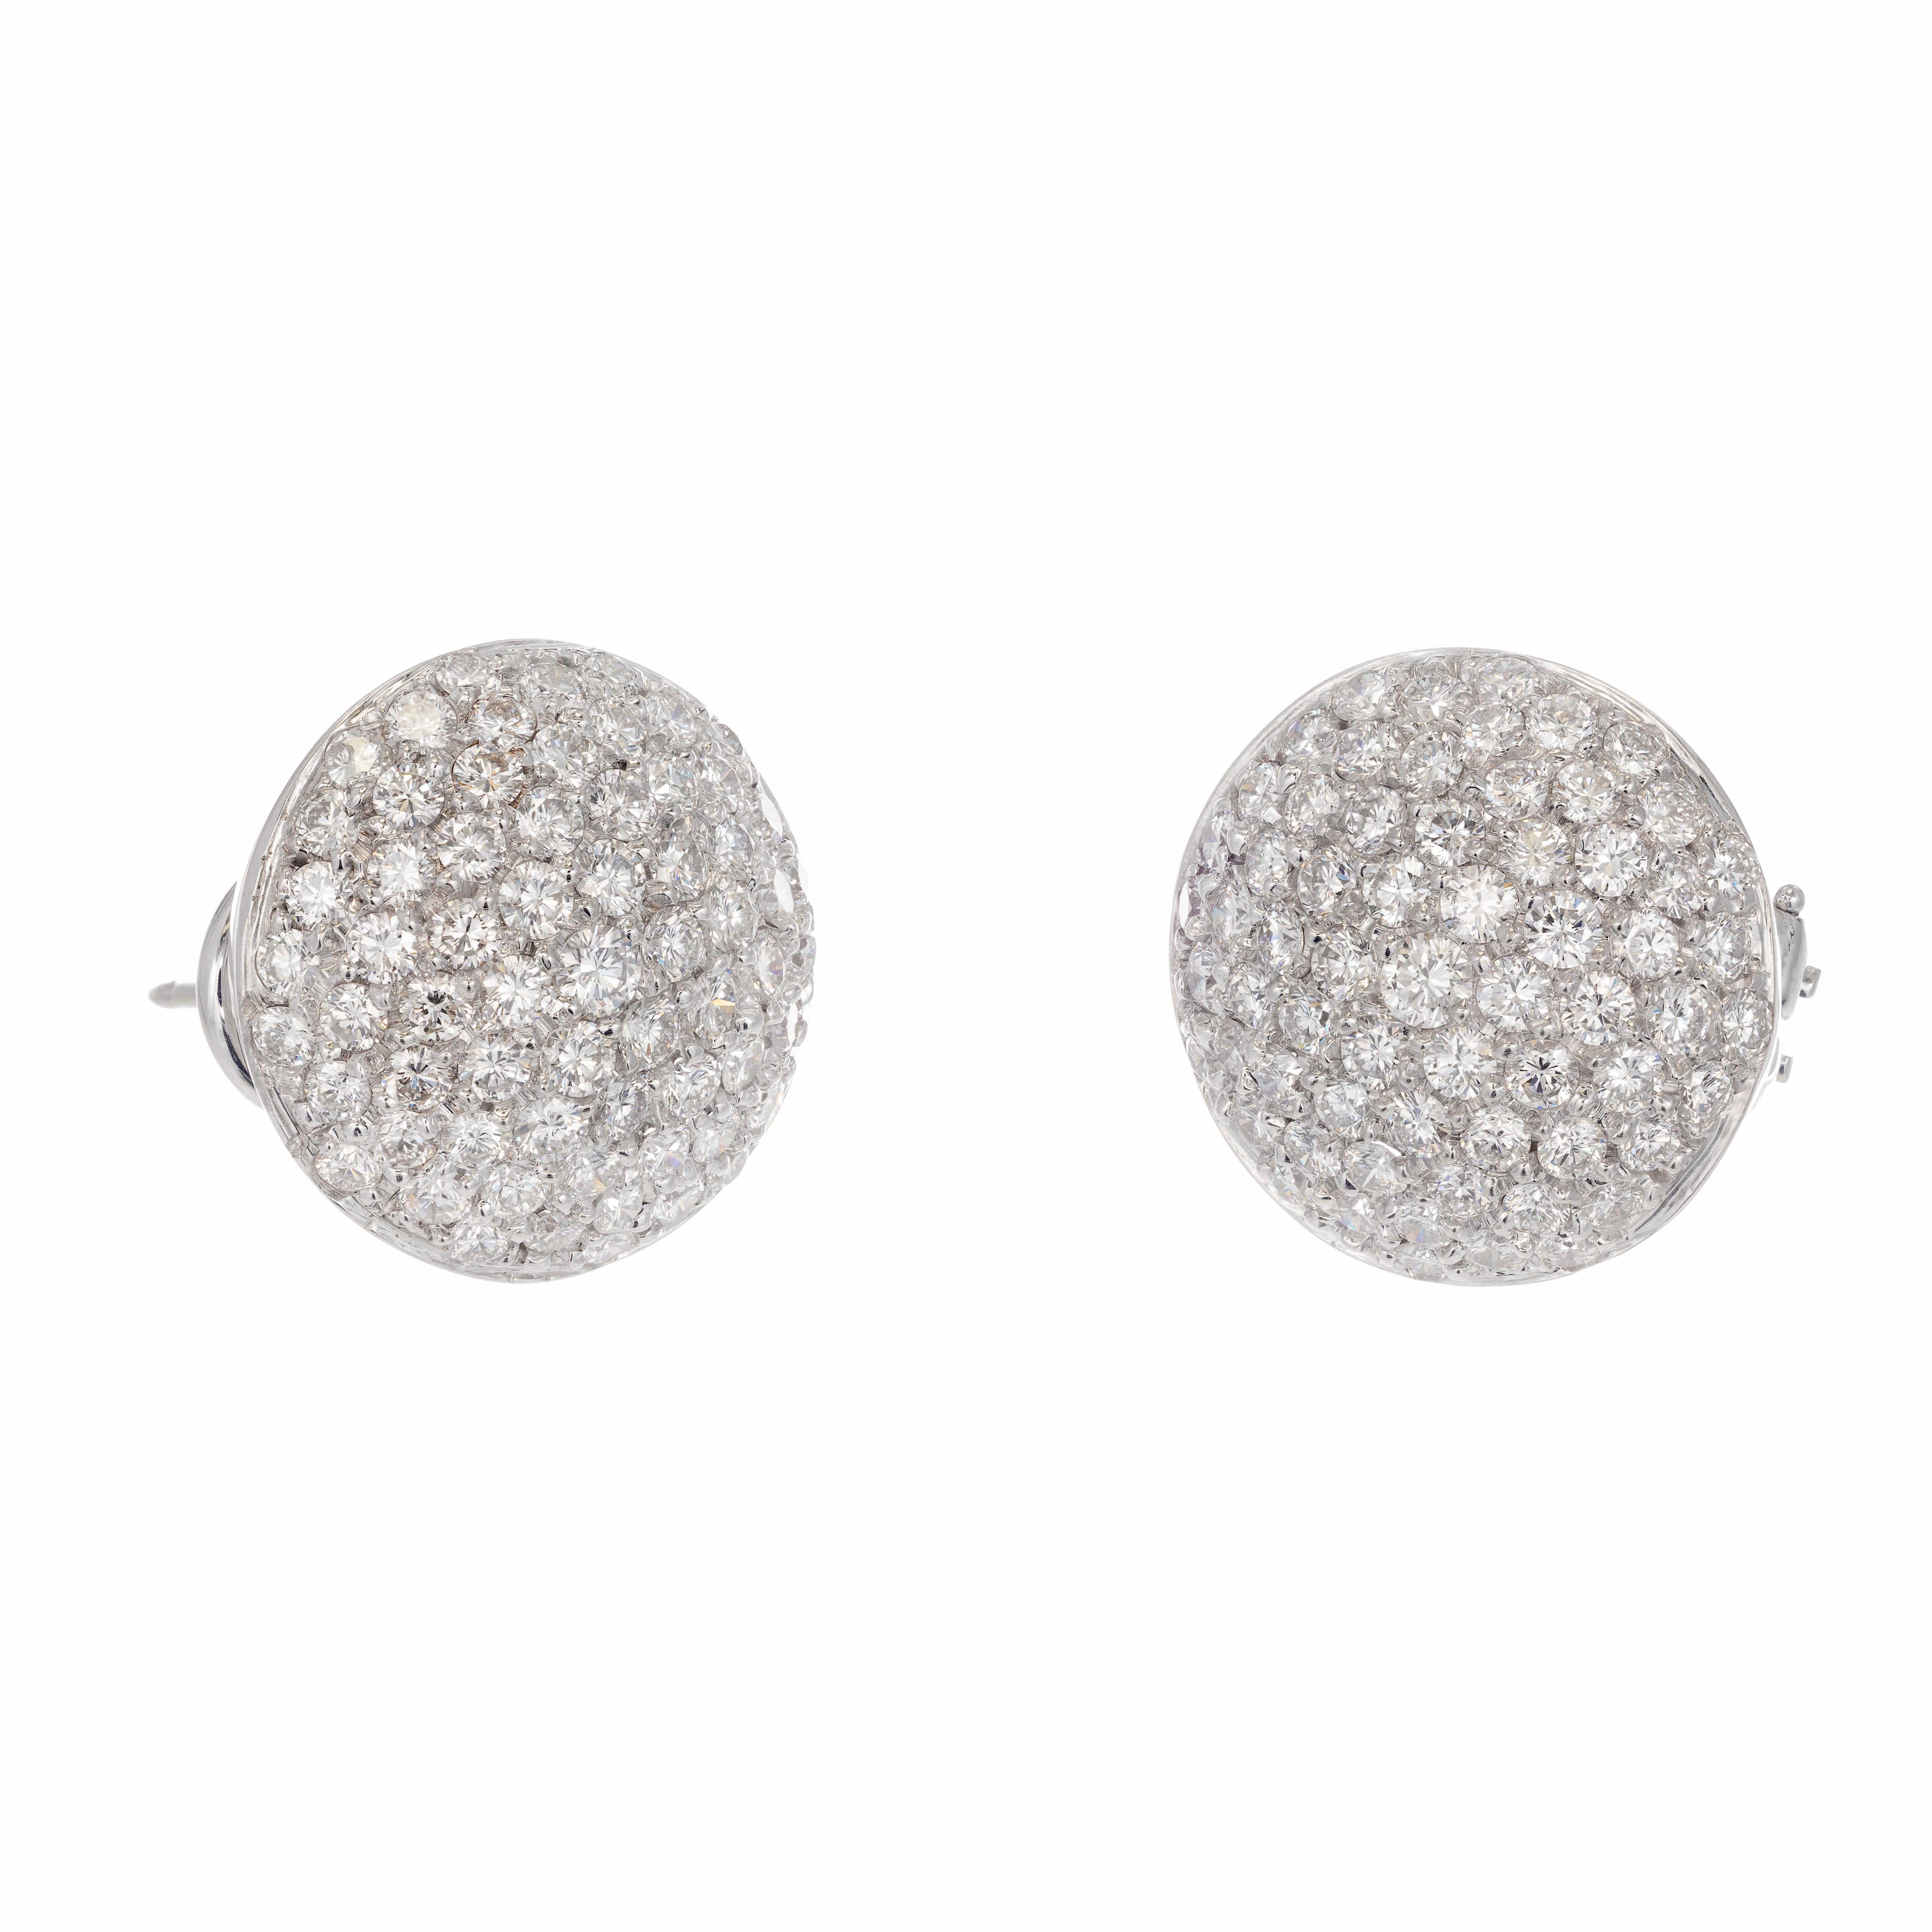 18k white gold 3.56 carat diamond cluster earrings. Round dome button style earrings covered with round brilliant cut diamonds all over. Pave set in 18k white gold.

130 round brilliant cut G-H VS diamonds Approximate 3.56 carats
18k White